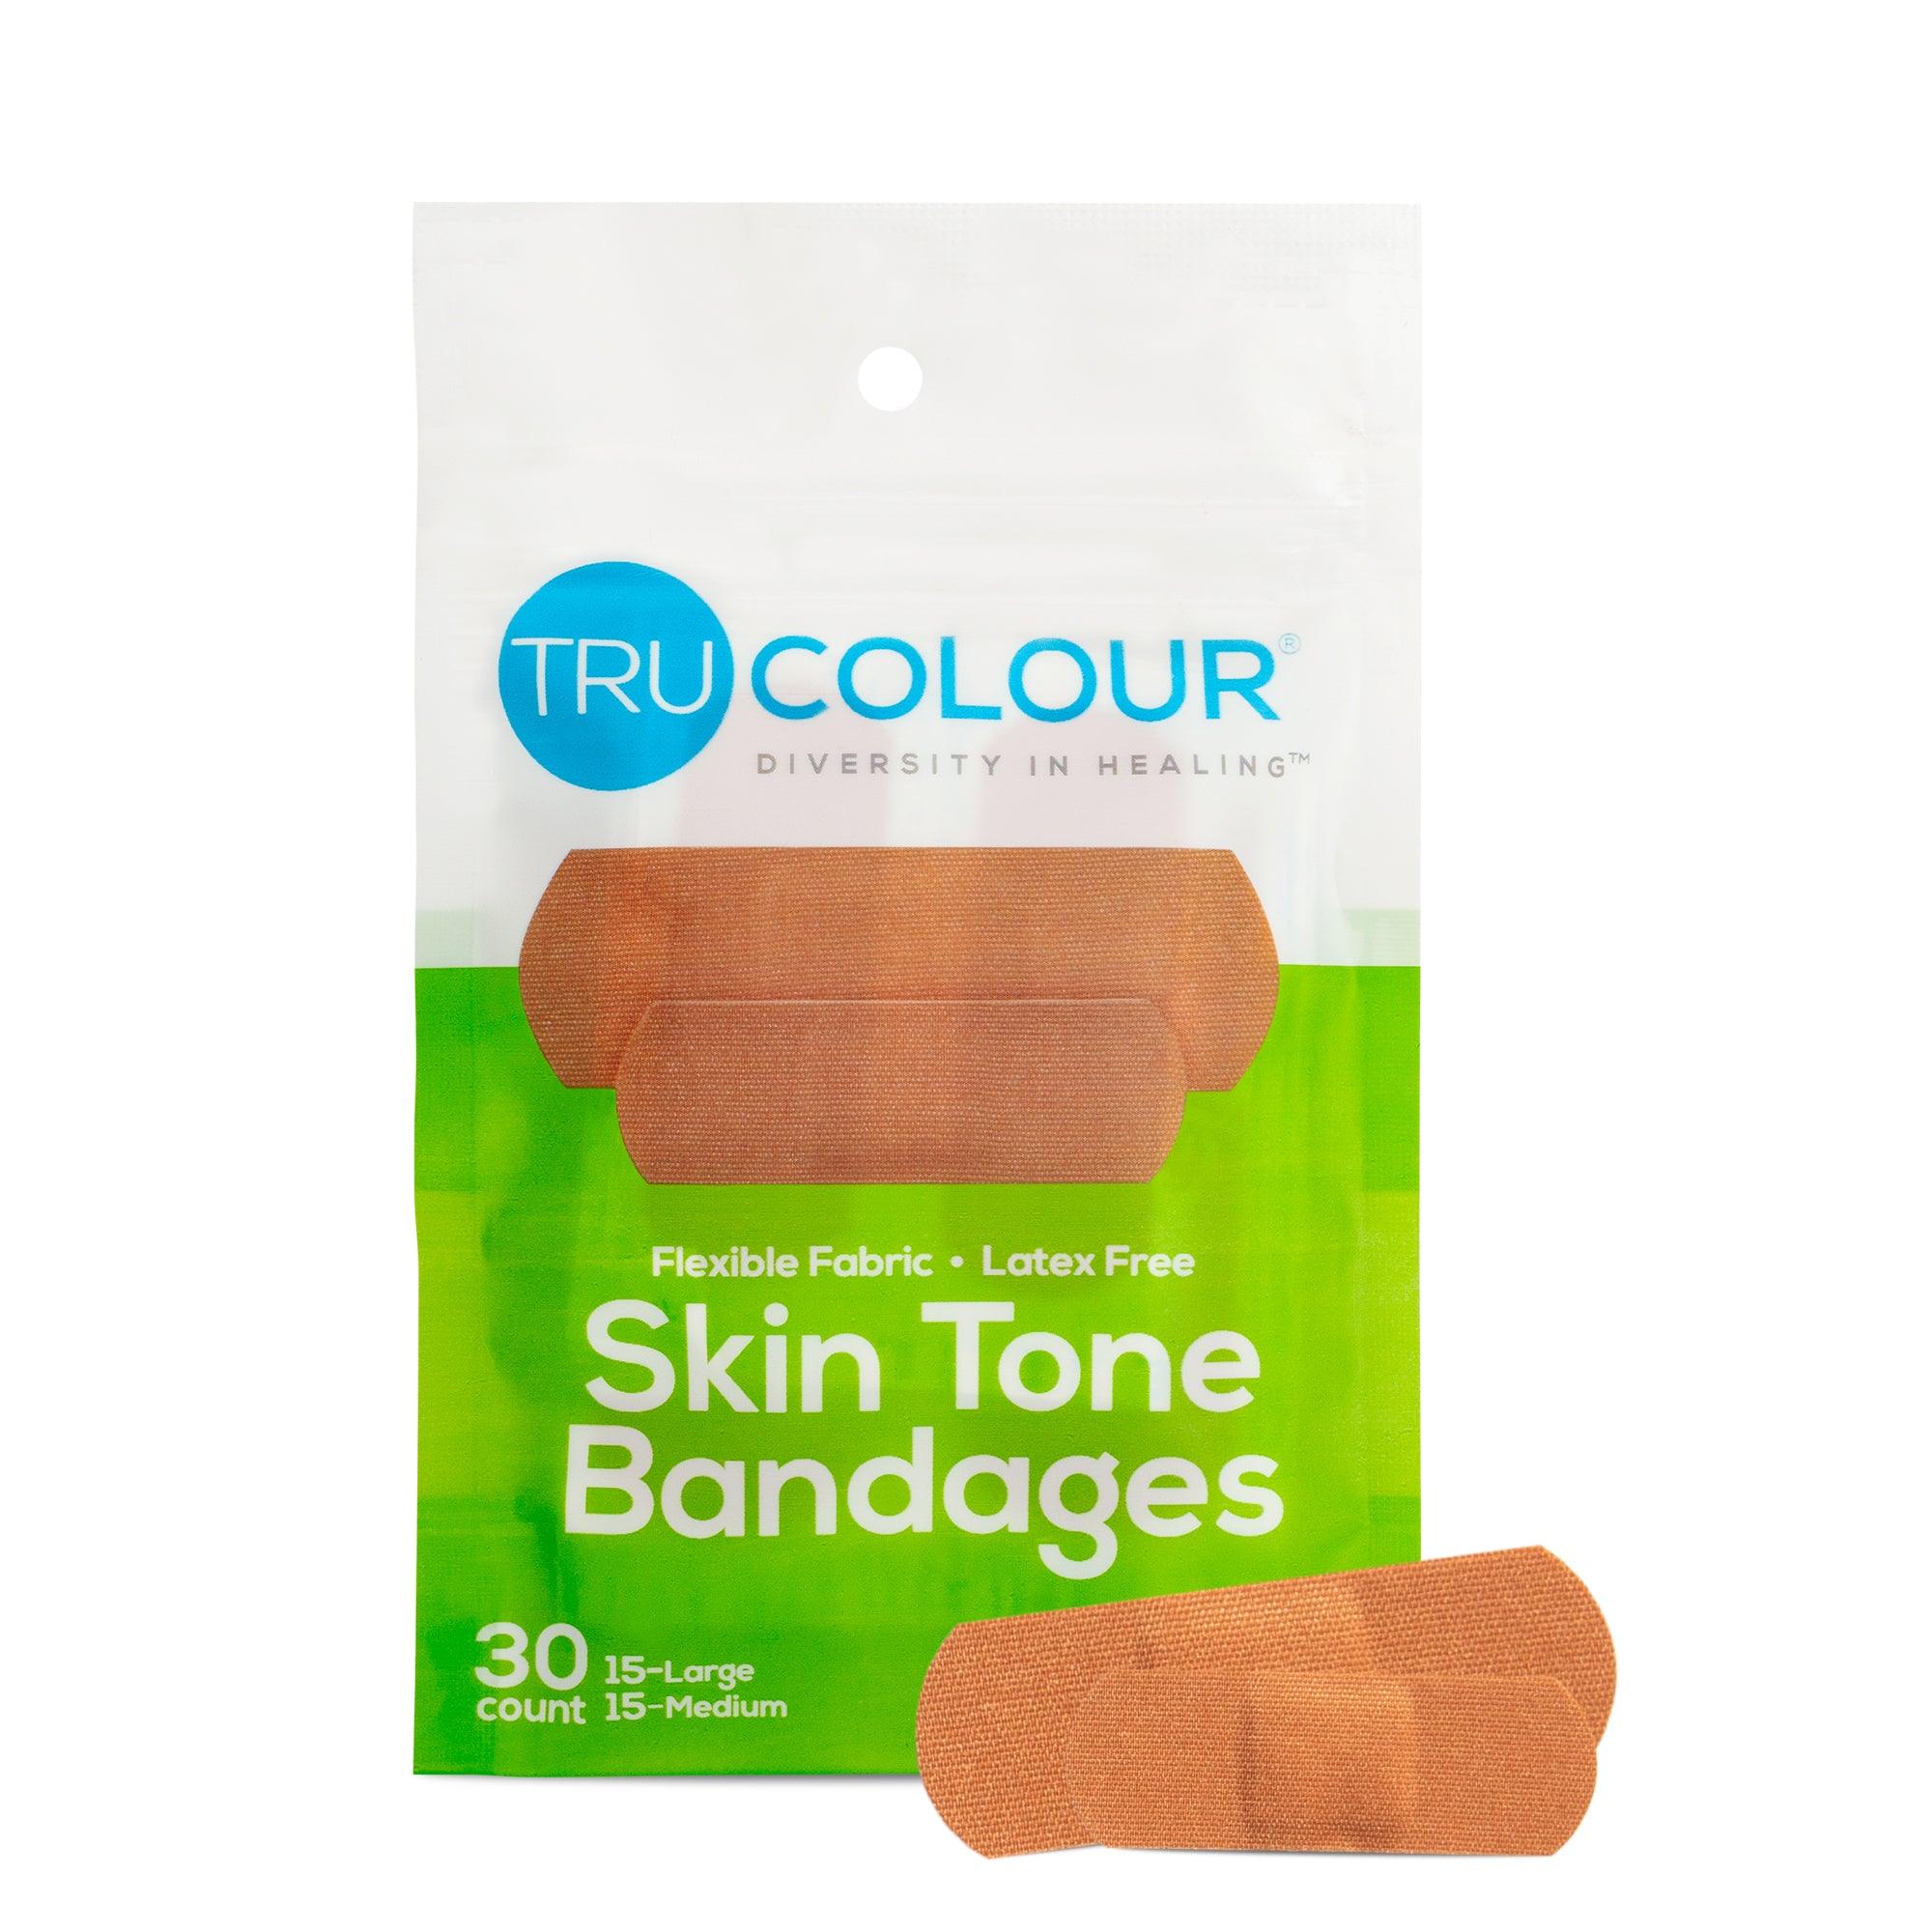 Tru-Colour Skin Tone Bandages Variety 4 Bag Pack (120 Count)